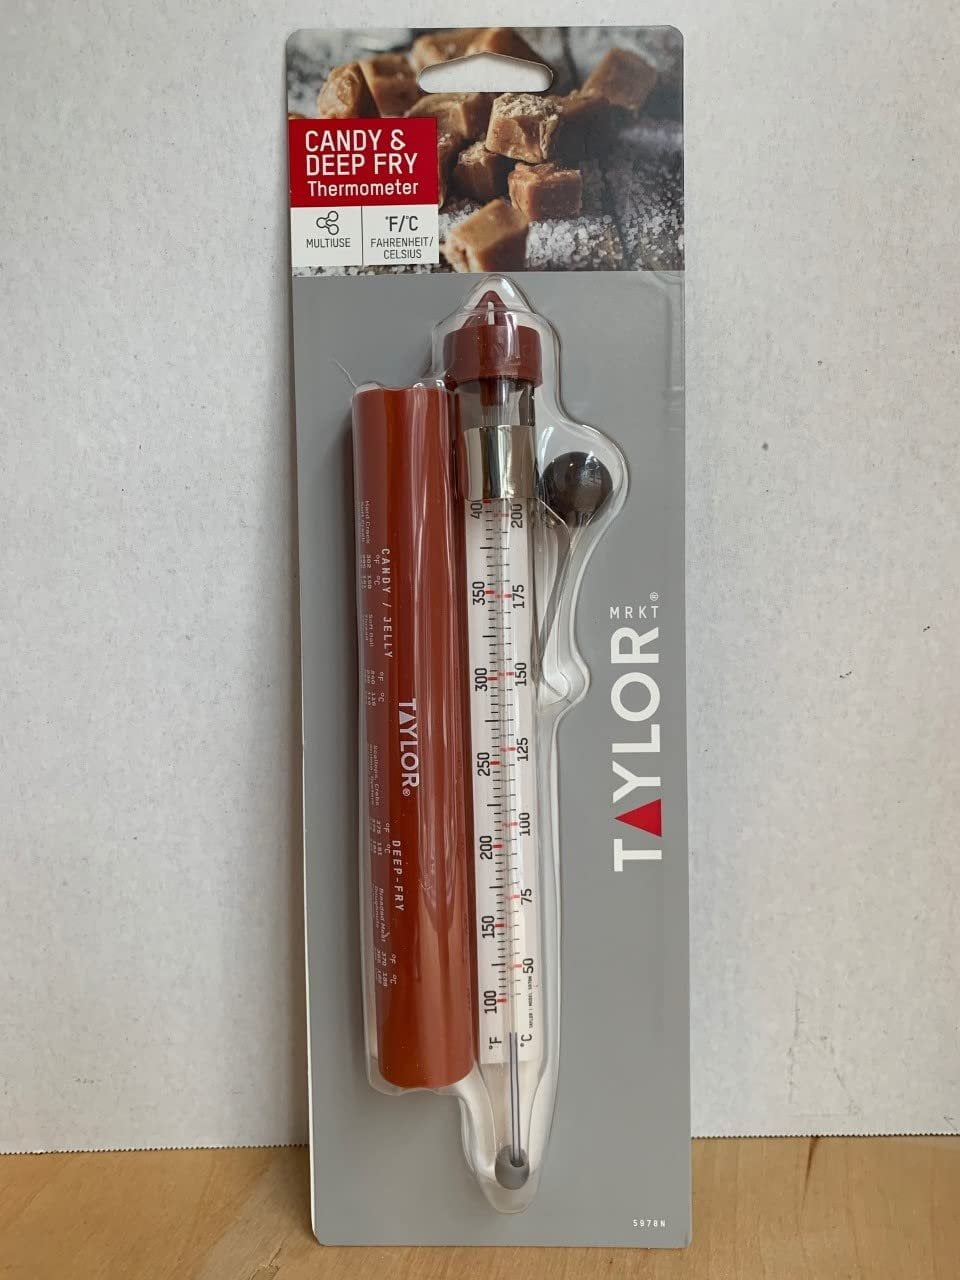 Taylor Home Candy & Deep Fry Thermometer